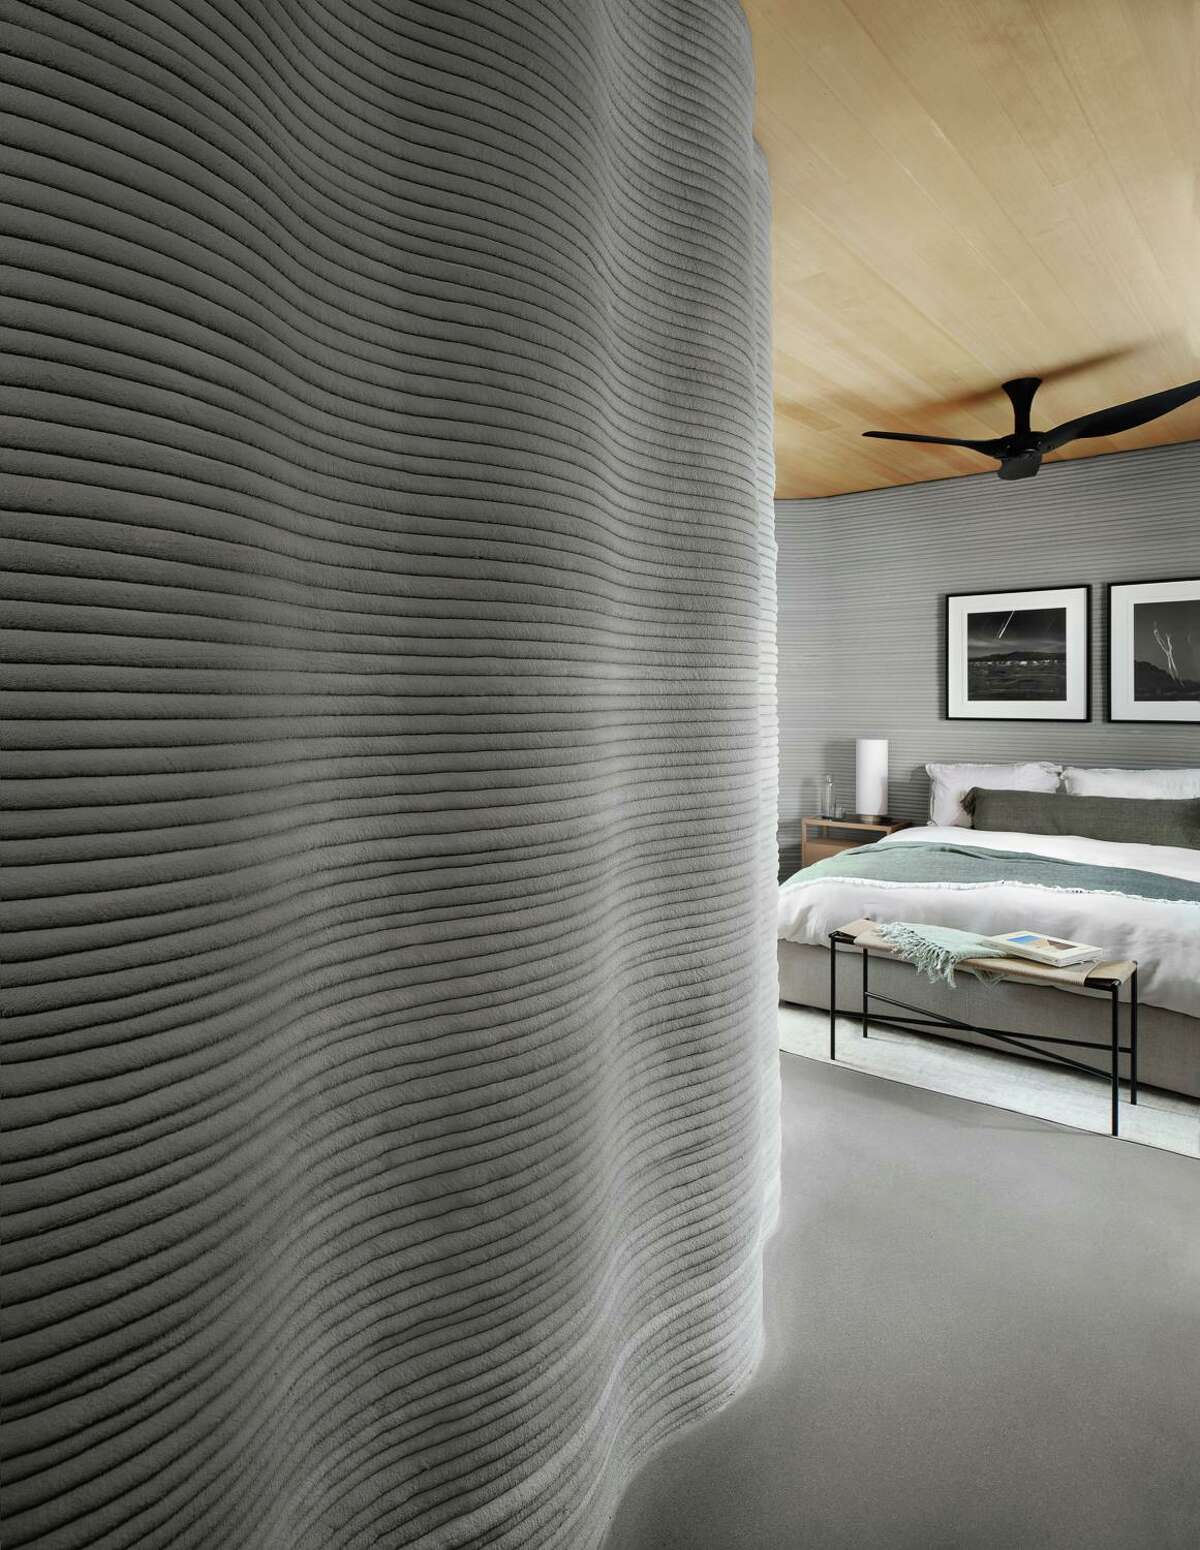 The owner’s suite is designed so the 3D-printed wall starts as a headboard but continues to make up part of the bedroom wall.